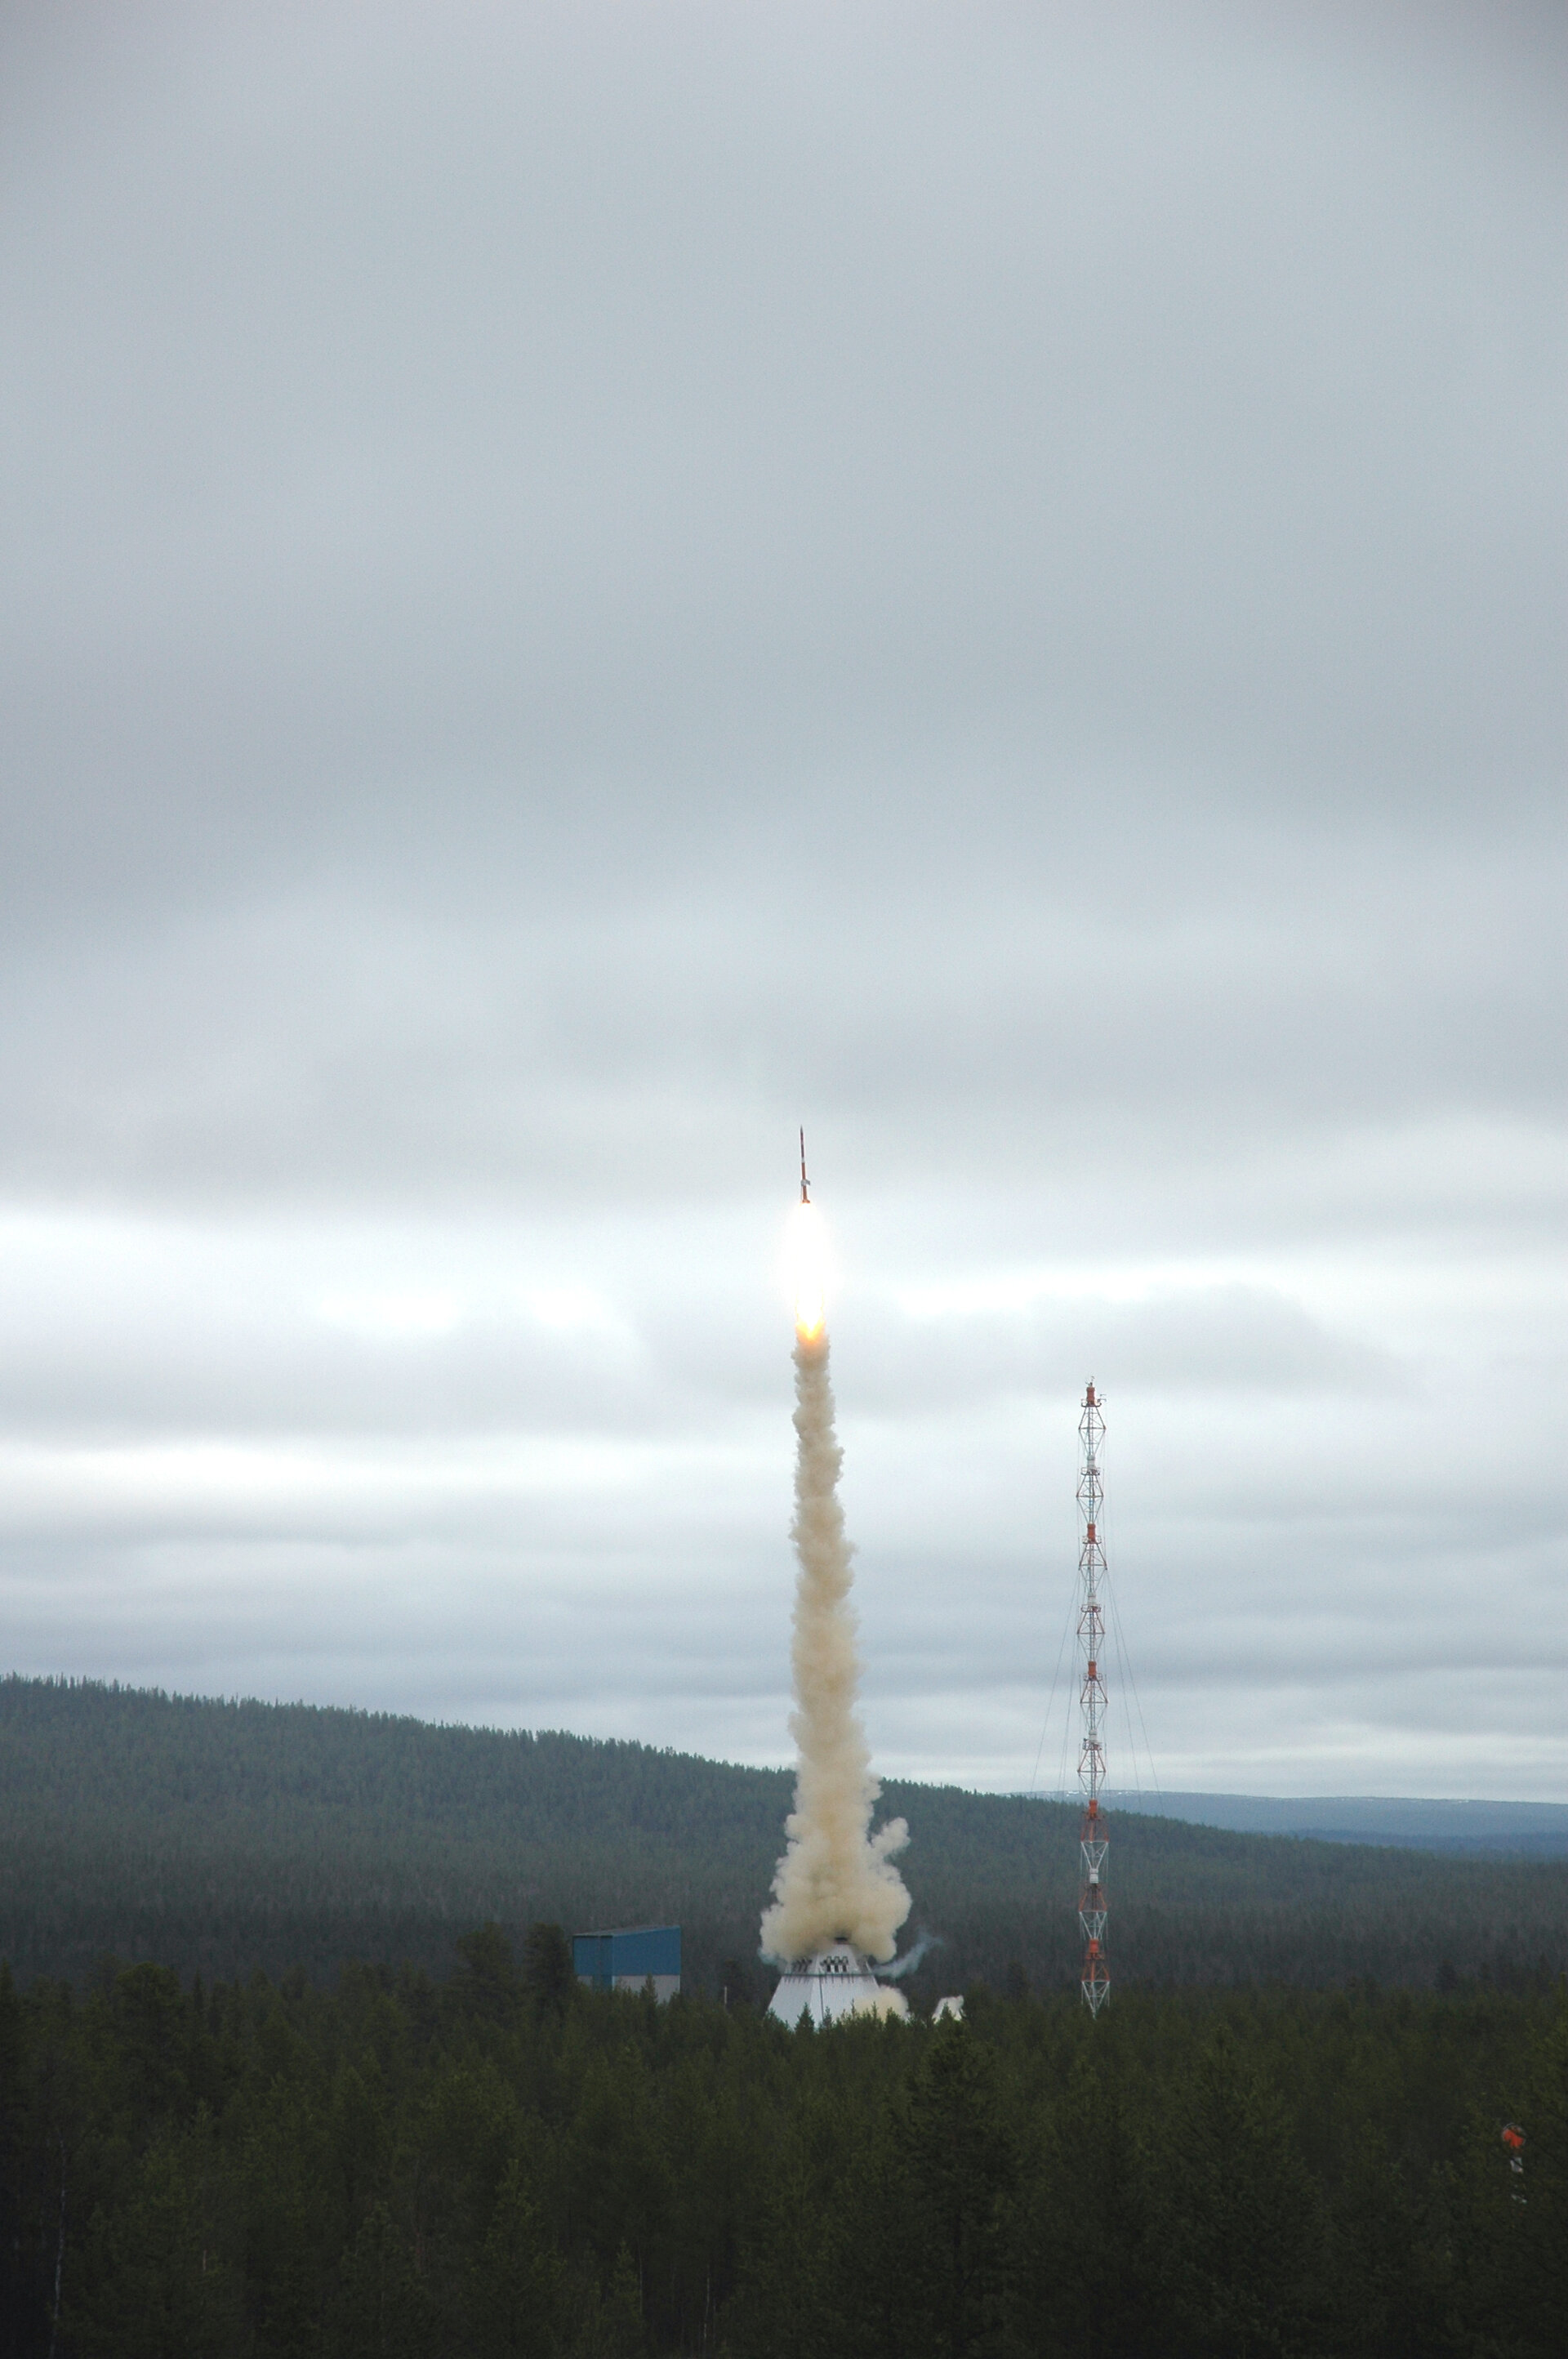 TEXUS 43 launched on 11 May 2006 at 08:12 UT